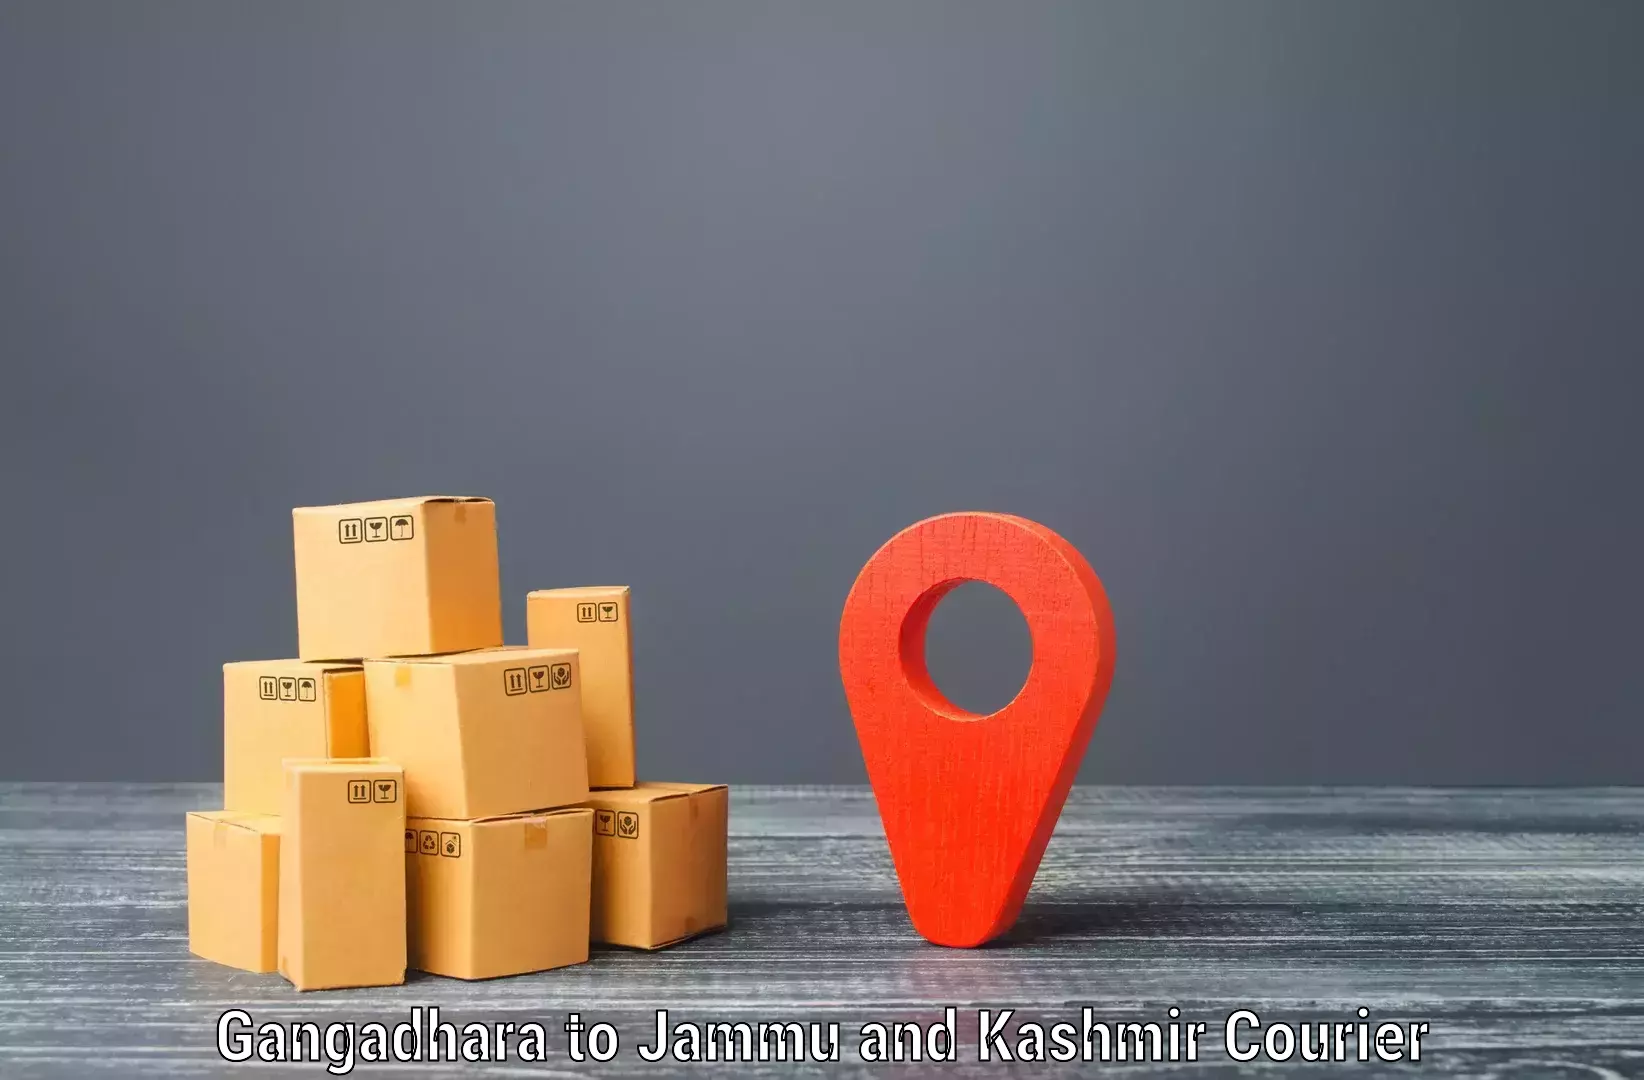 Professional courier services in Gangadhara to Nagrota